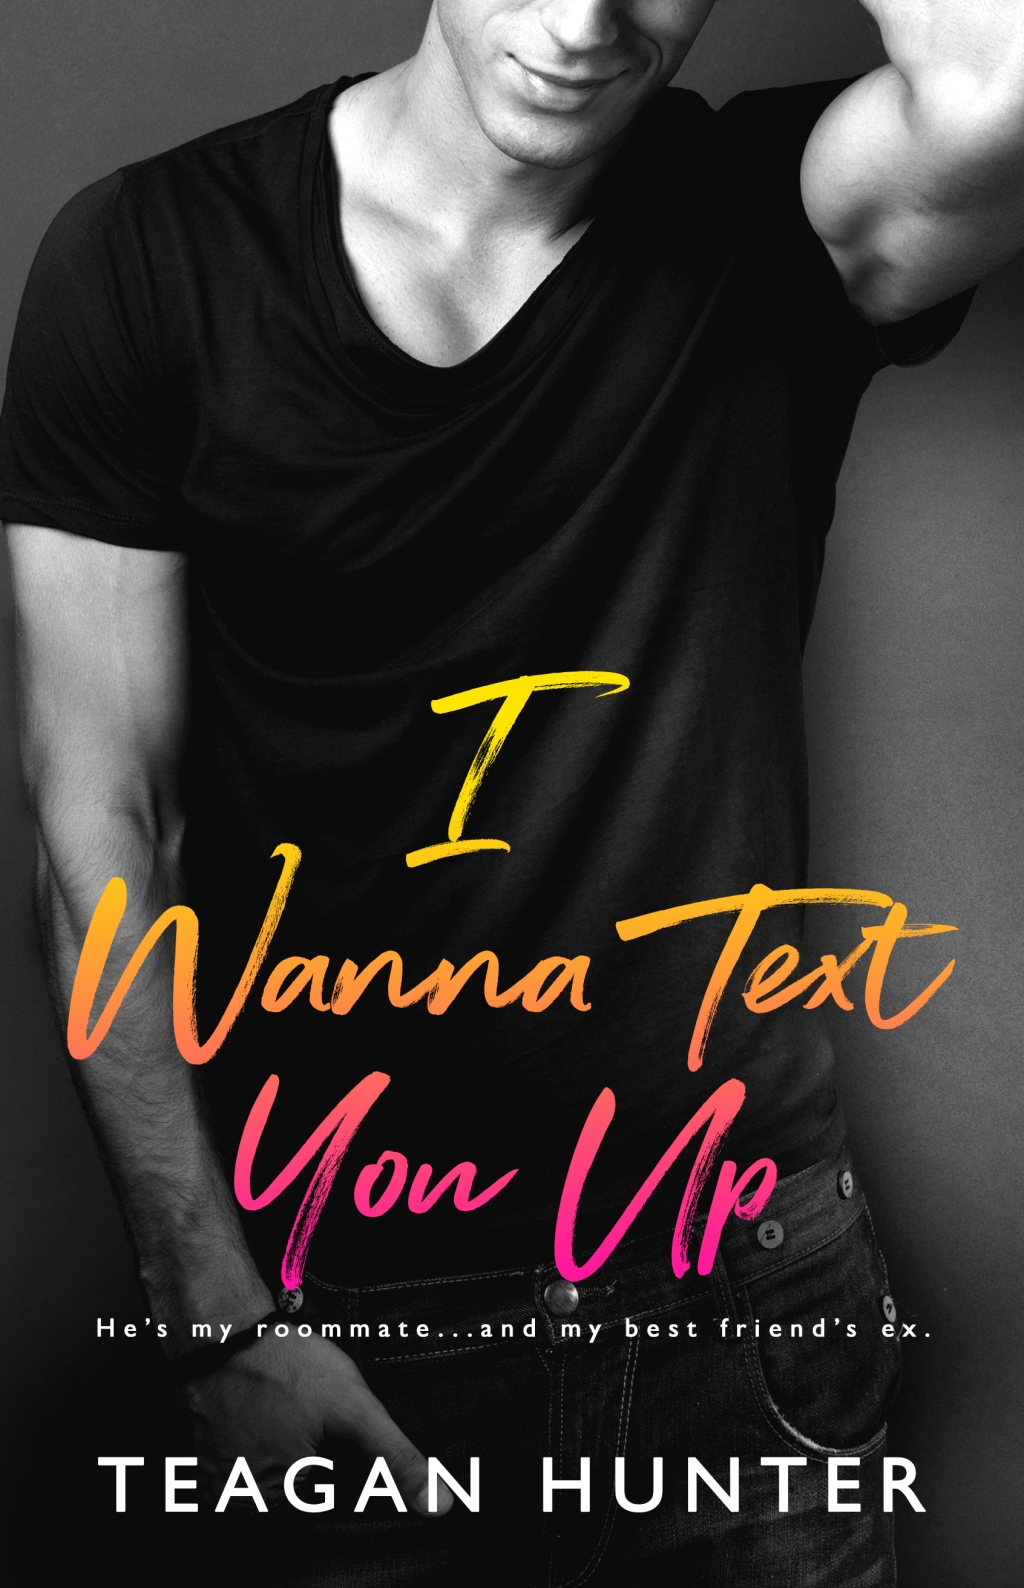 I Wanna Text You Up by Teagan Hunter – 5 STARS (Book Review)